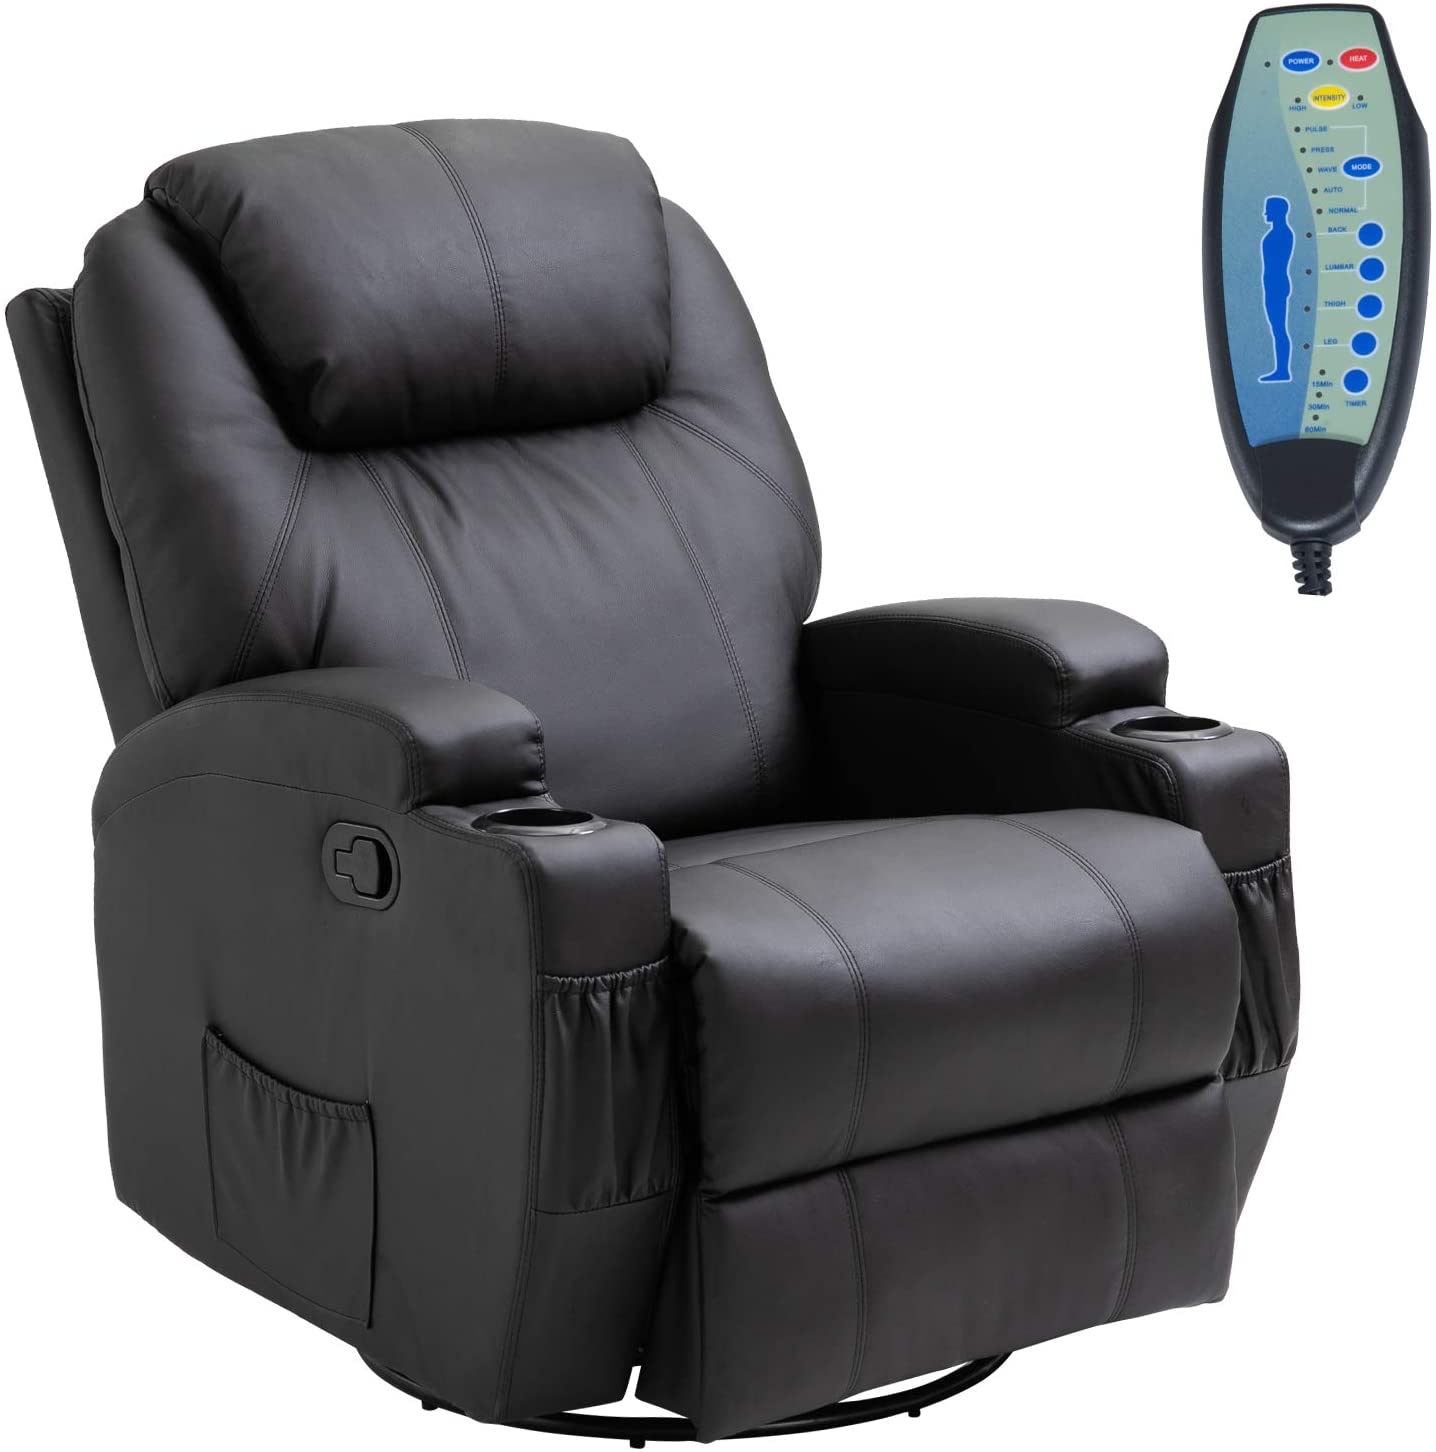 <strong>HomCom PU Leather Heated Massage Chair</strong>